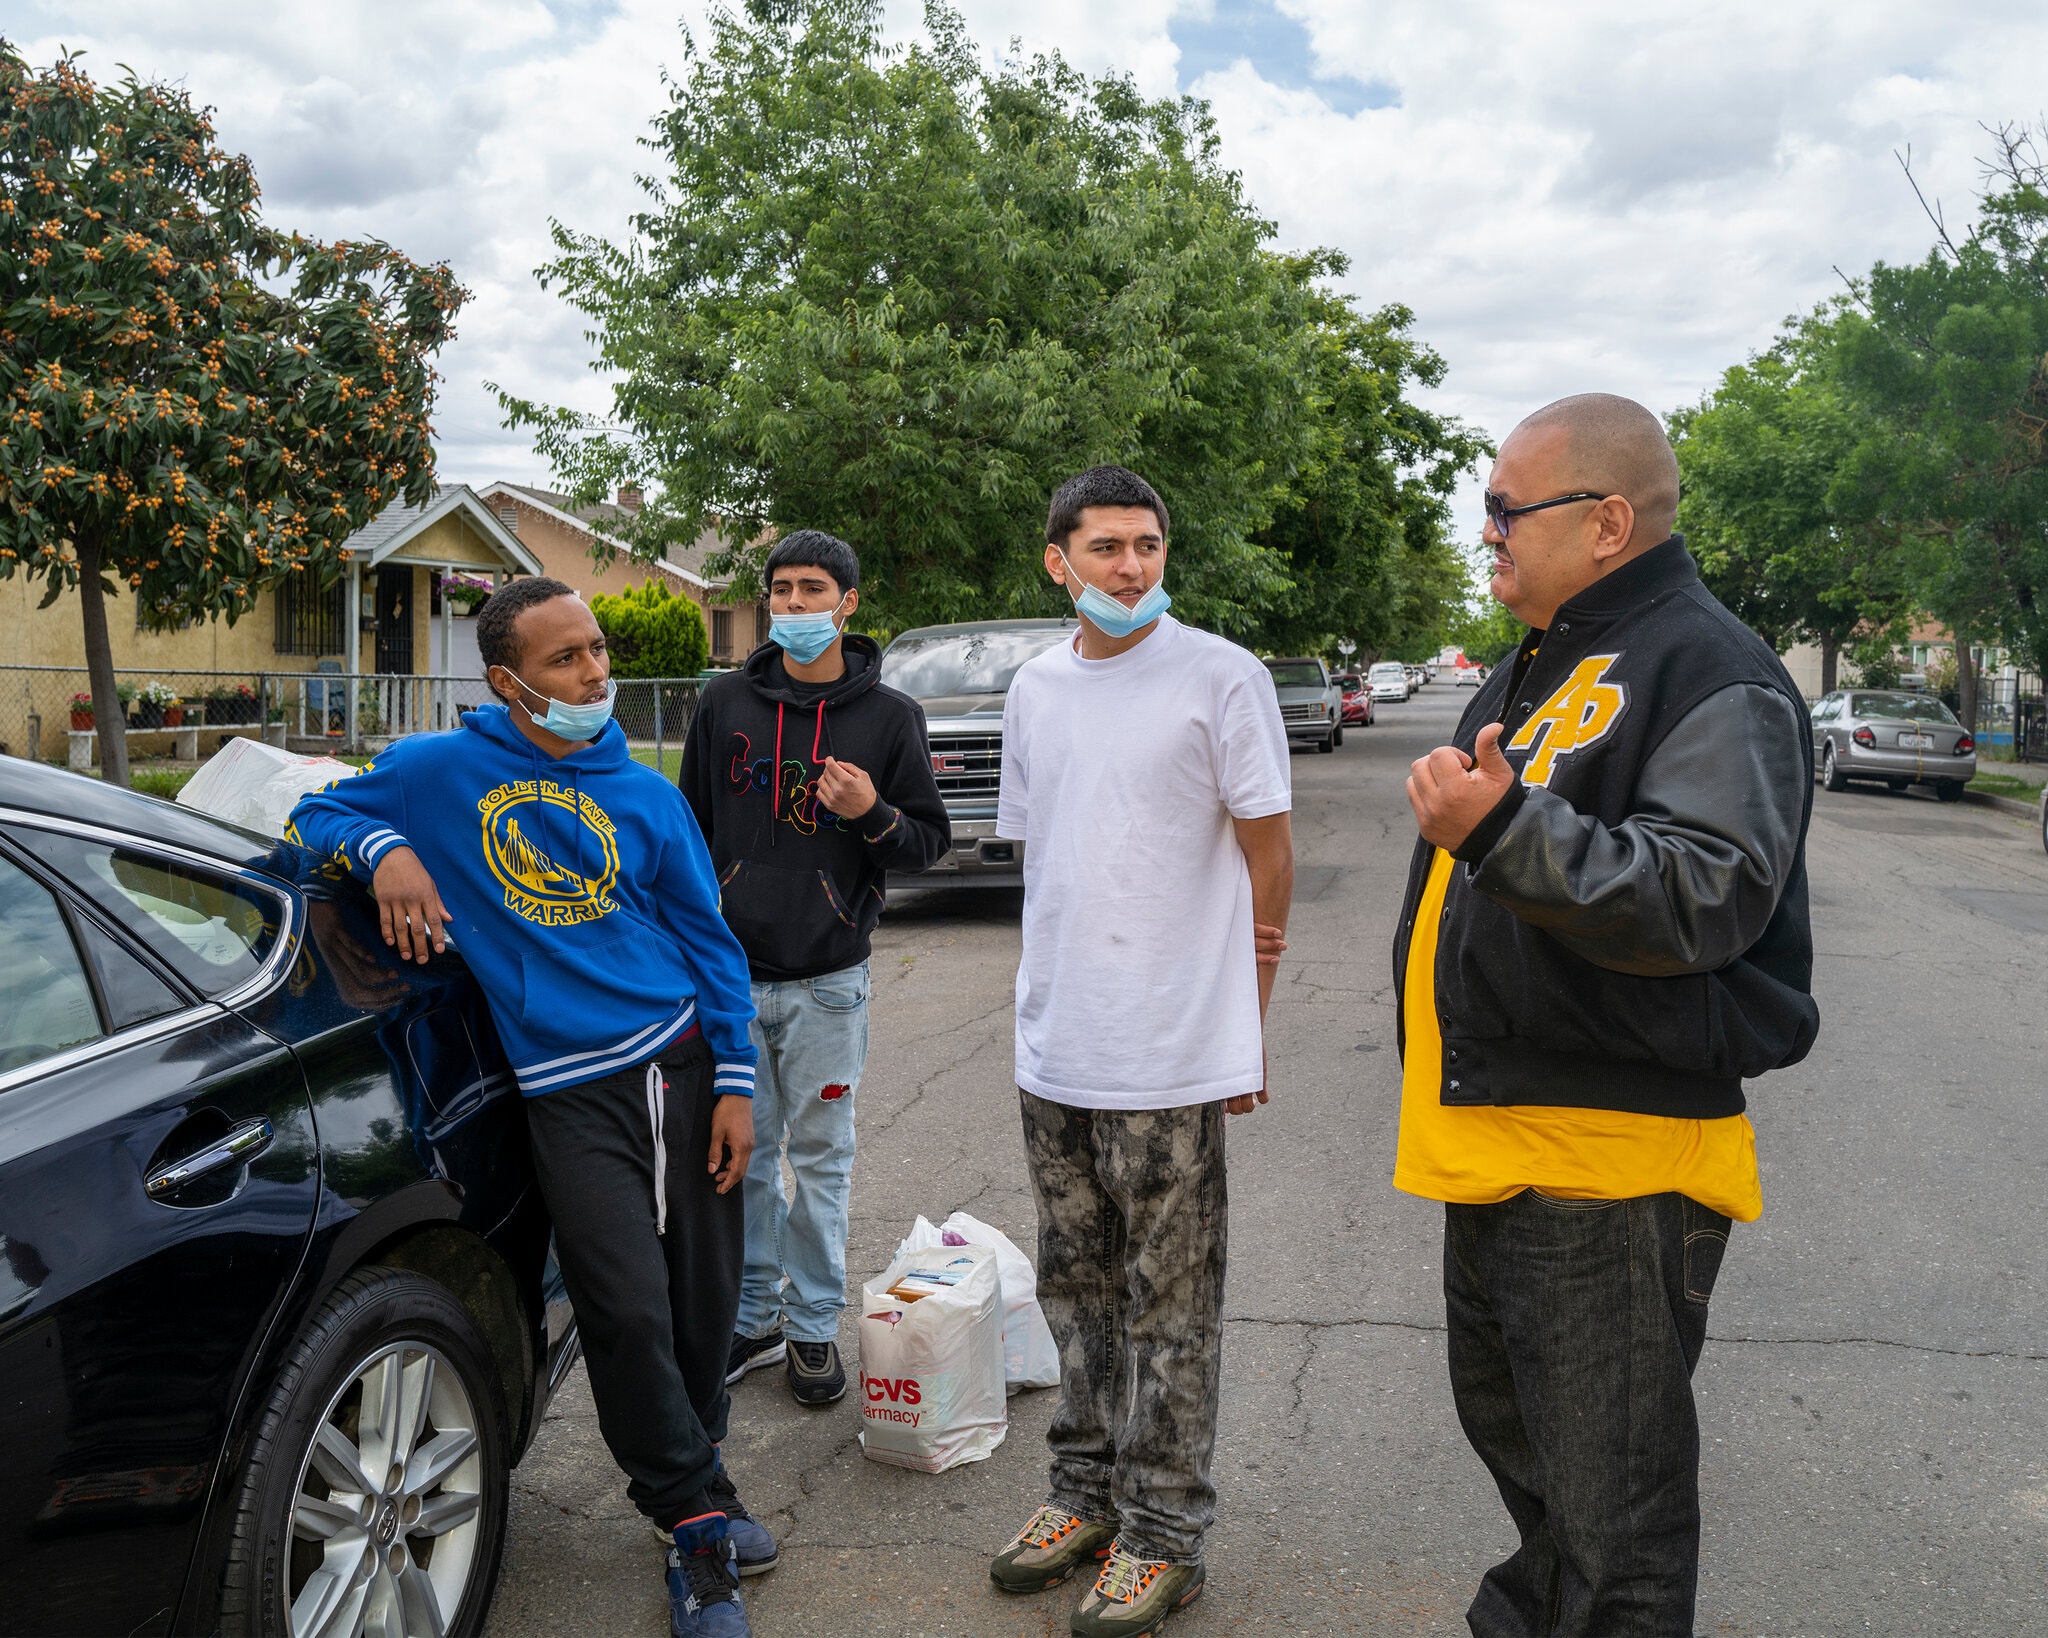 A group of four men stand outdoors on a residential street. Three younger men, two in masks, are standing together as an older man in a black jacket speaks to them. They are near a black car with a CVS bag on the ground. Trees and houses provide the backdrop. It’s like a scene from Berkeley Journalism unfolding in real life.